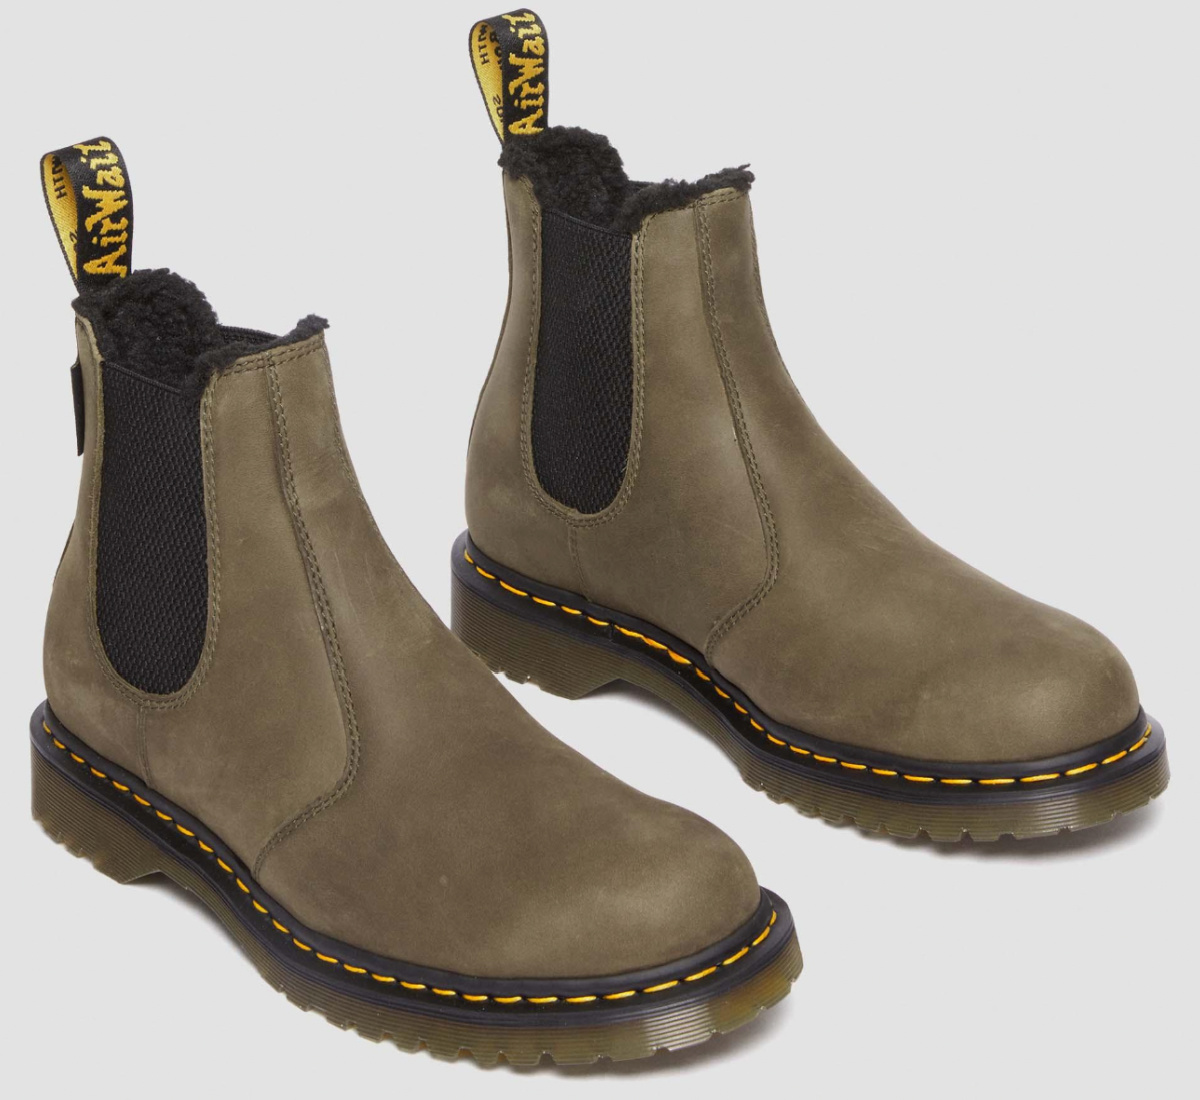 olive colored fleece lined boots